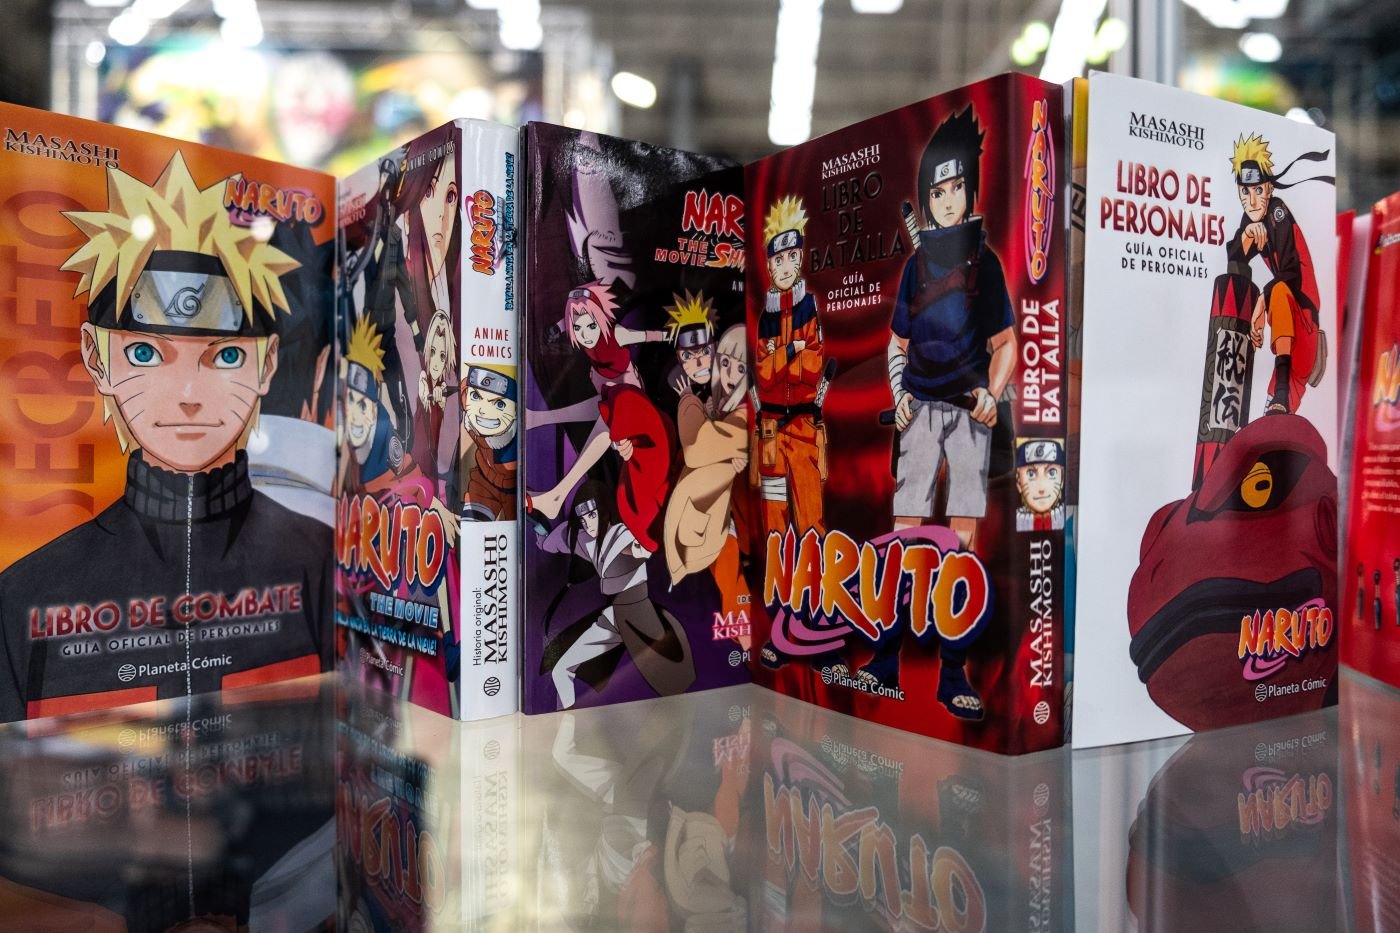 5 'Naruto' mangas lined up showing the covers.